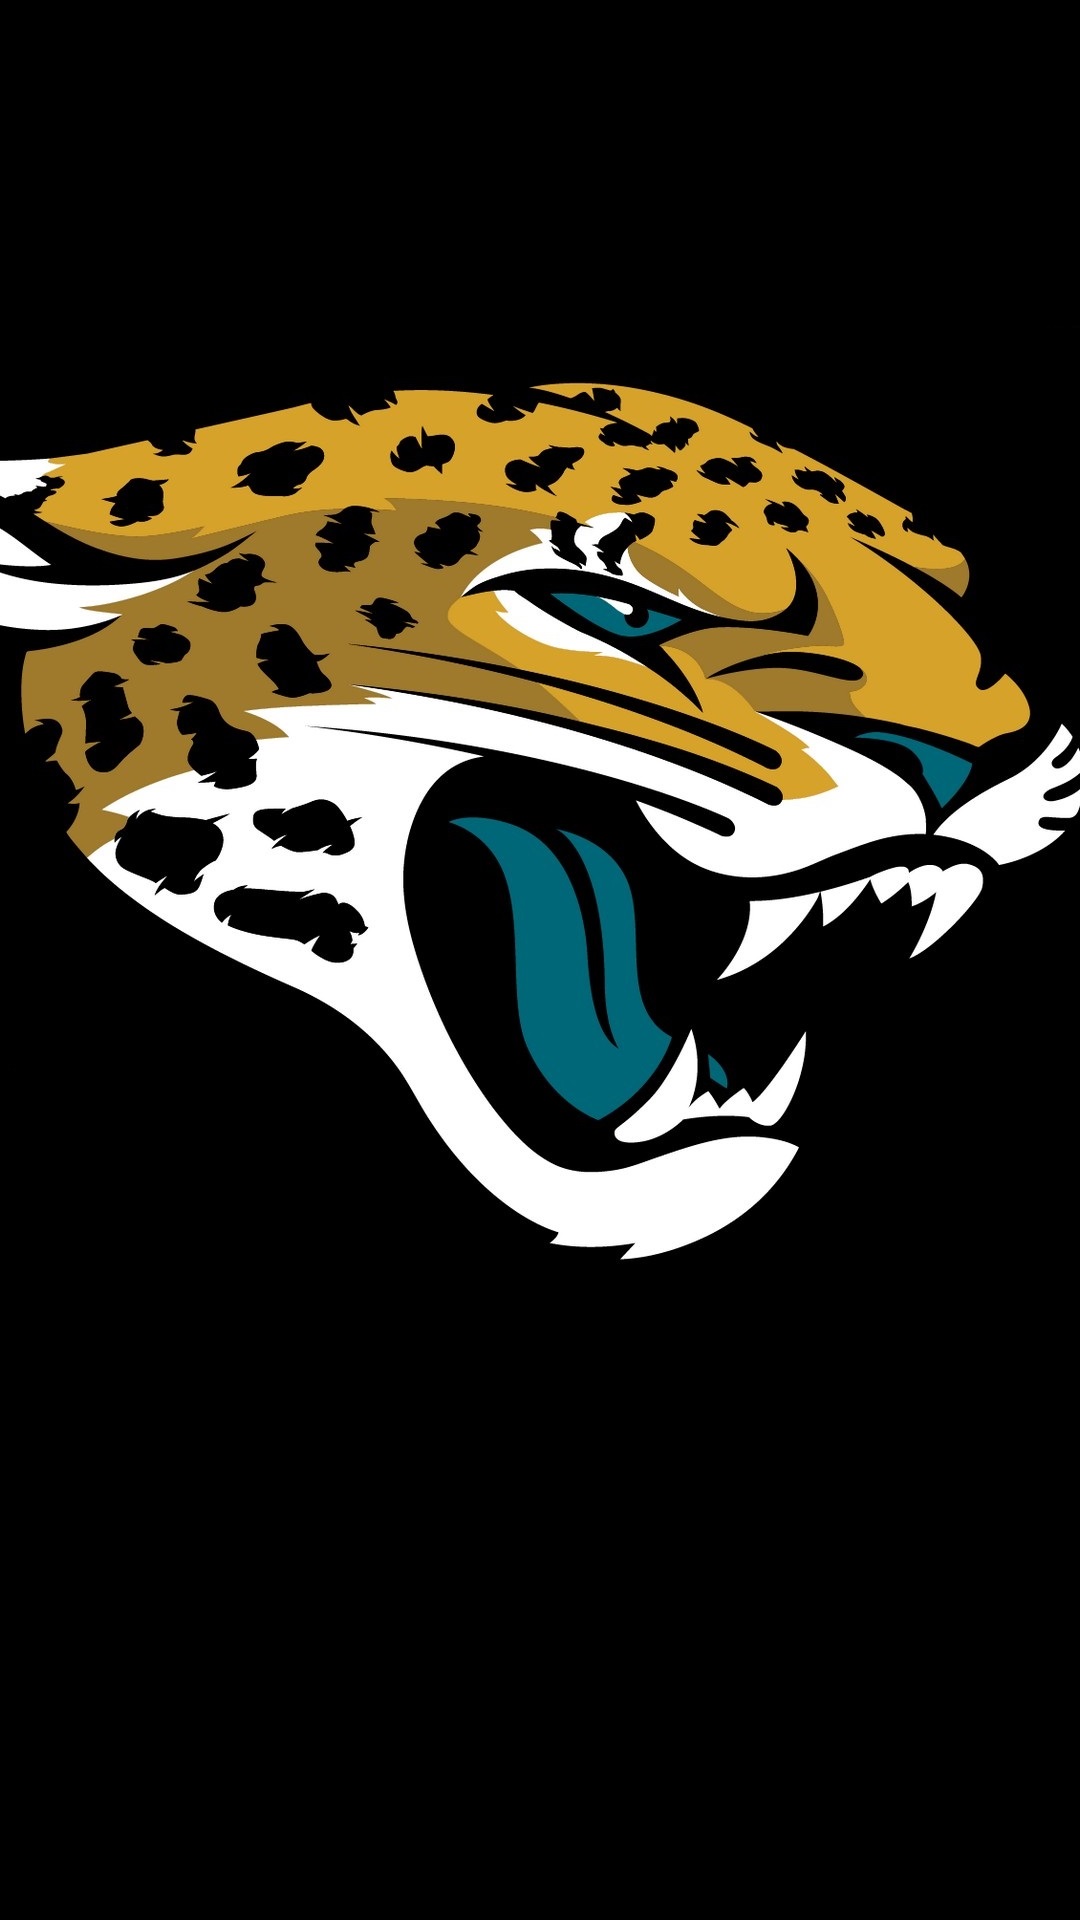 Jacksonville Jaguars iPhone Backgrounds With high-resolution 1080X1920 pixel. Download and set as wallpaper for Desktop Computer, Apple iPhone X, XS Max, XR, 8, 7, 6, SE, iPad, Android